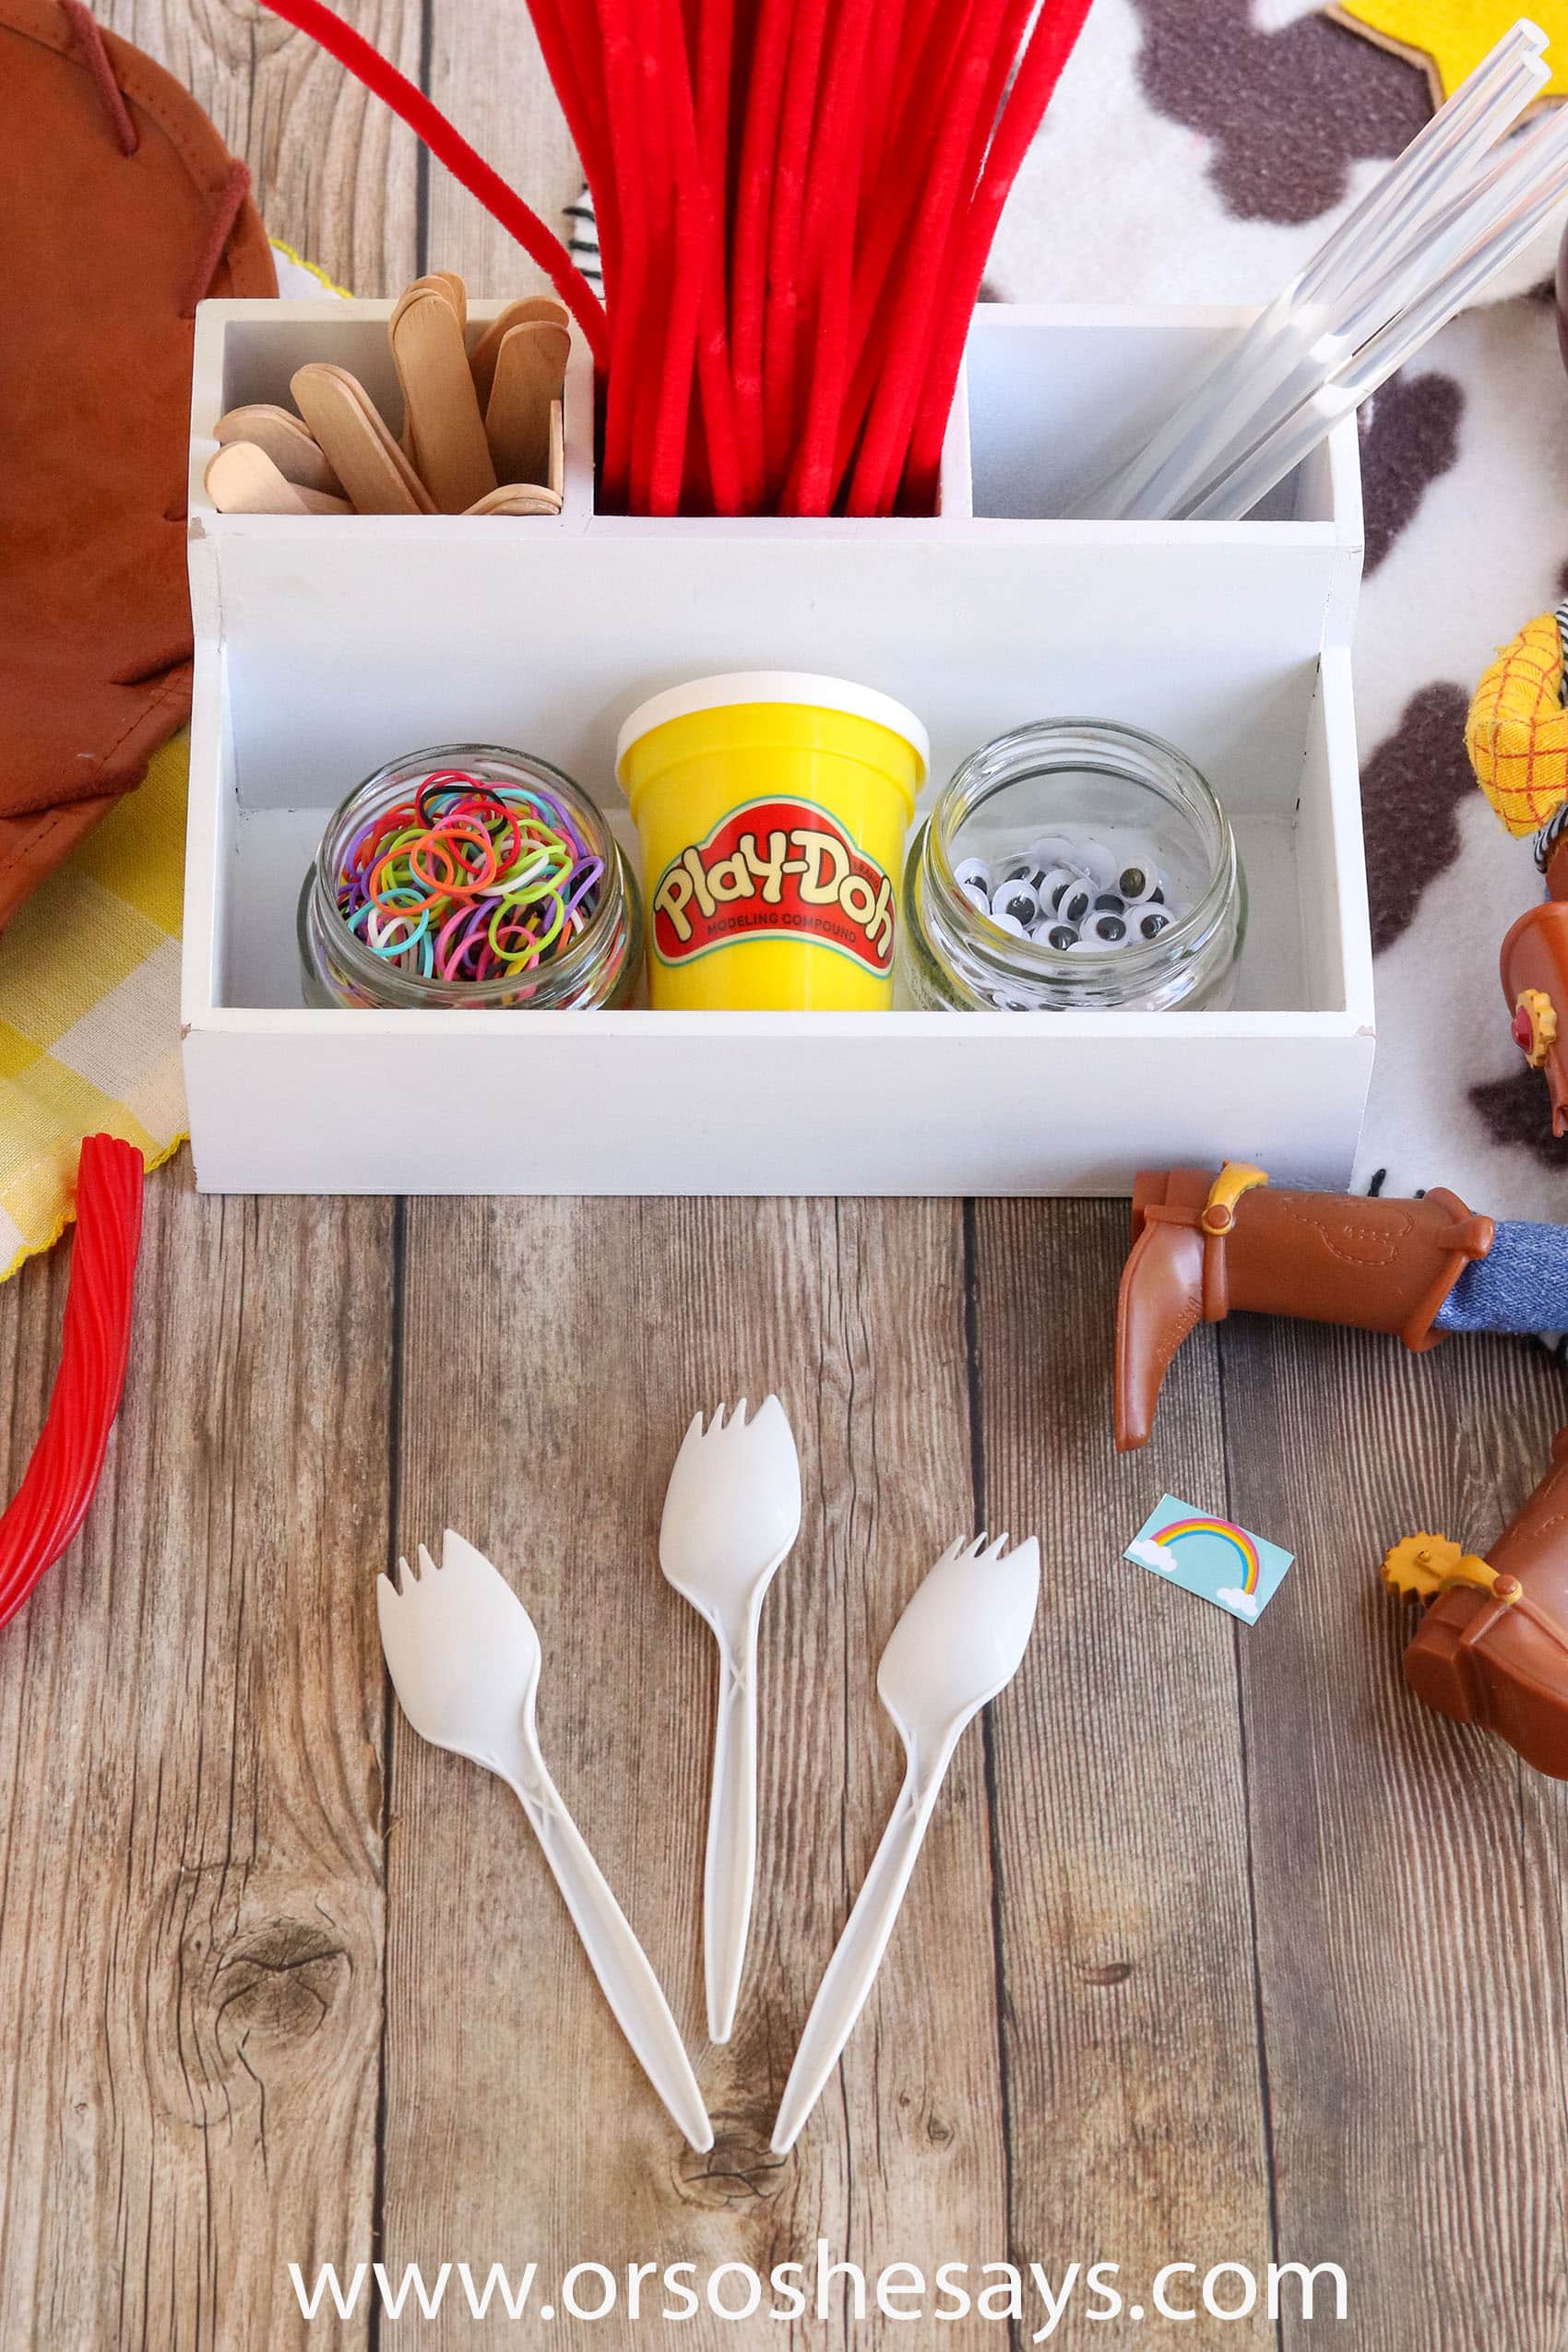 This DIY Forky from Toy Story 4 is so adorable! Perfect for a Toy Story birthday party activity or to make on a summer day. #toystory #toystory4 #forky #disney #disneyland